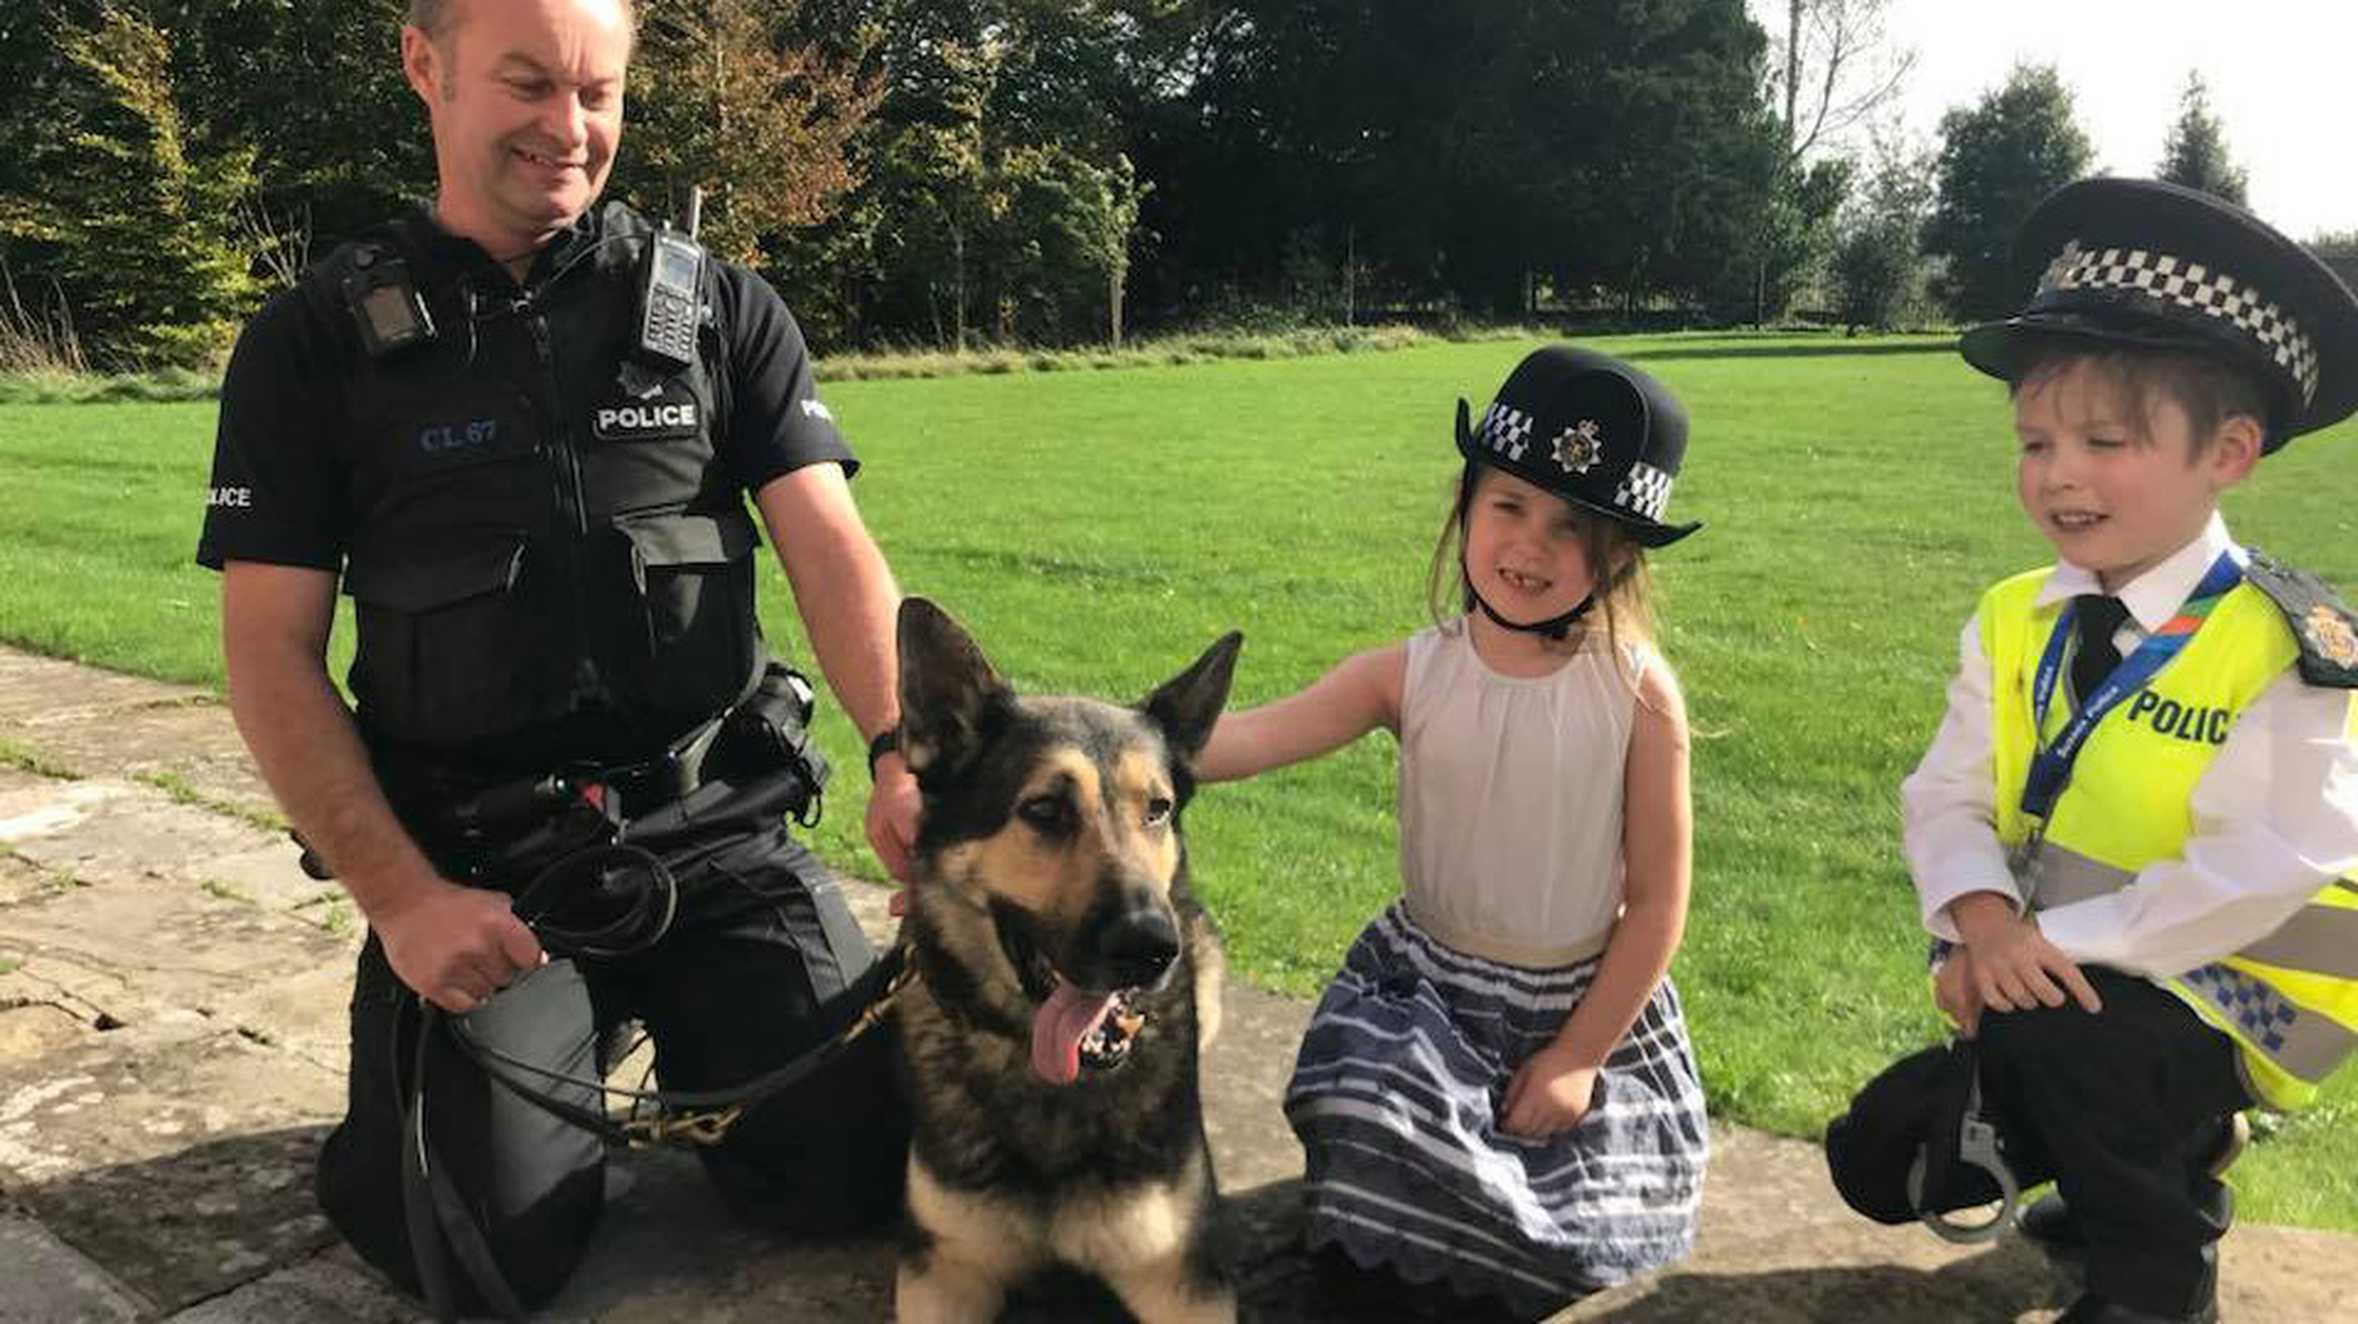 Danny and his sister with a police dog